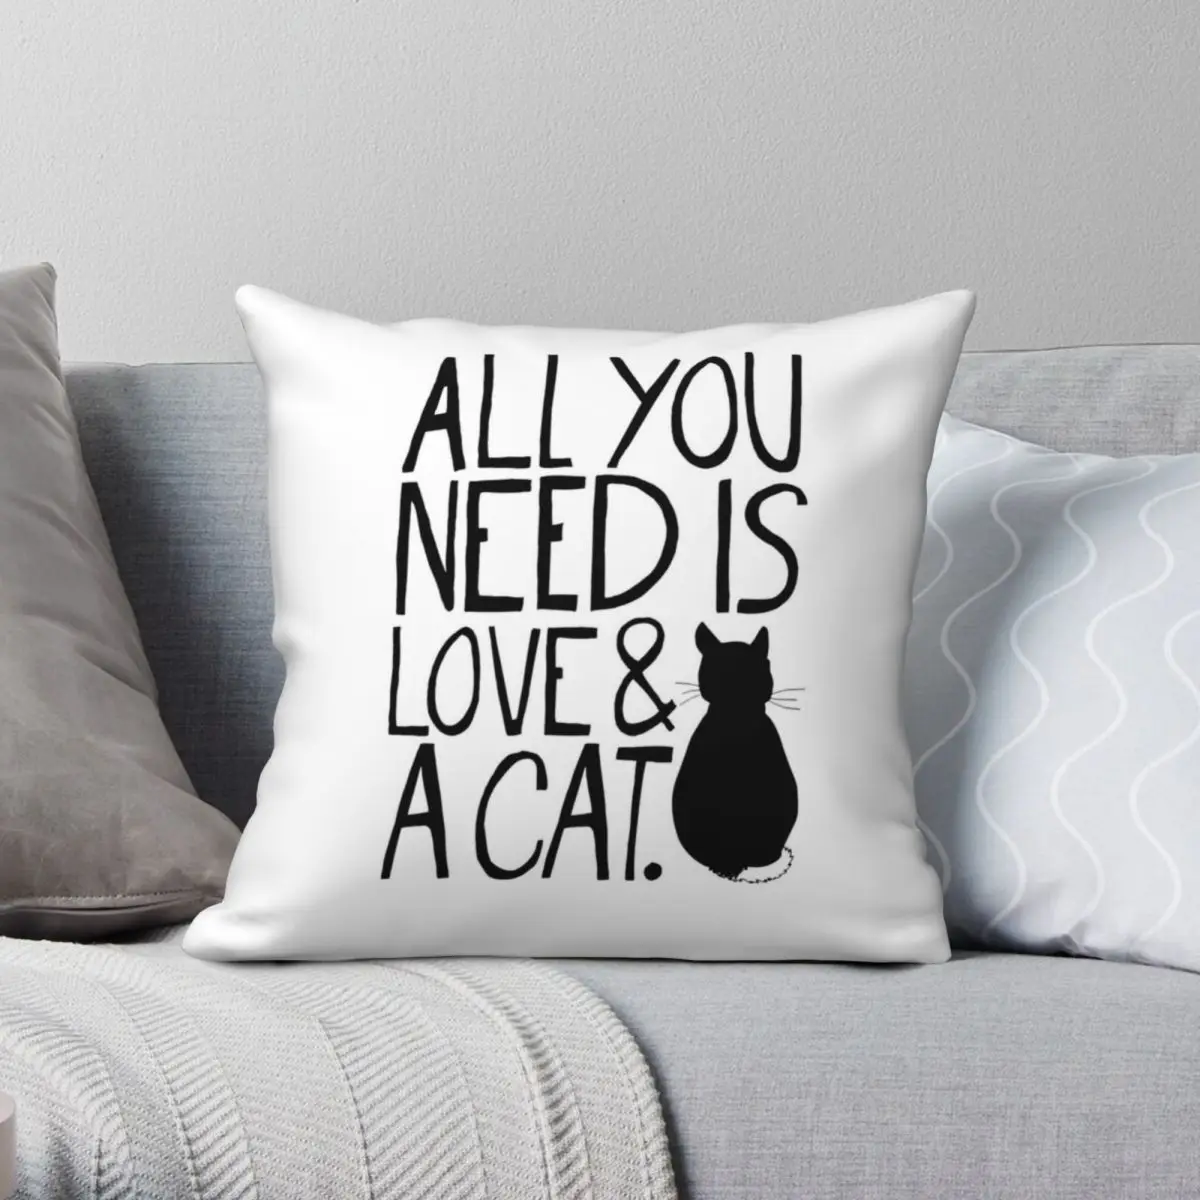 

All You Need Is Love And A Cat Pillowcase Polyester Linen Velvet Creative Zip Decorative Throw Pillow Case Bed Cushion Case